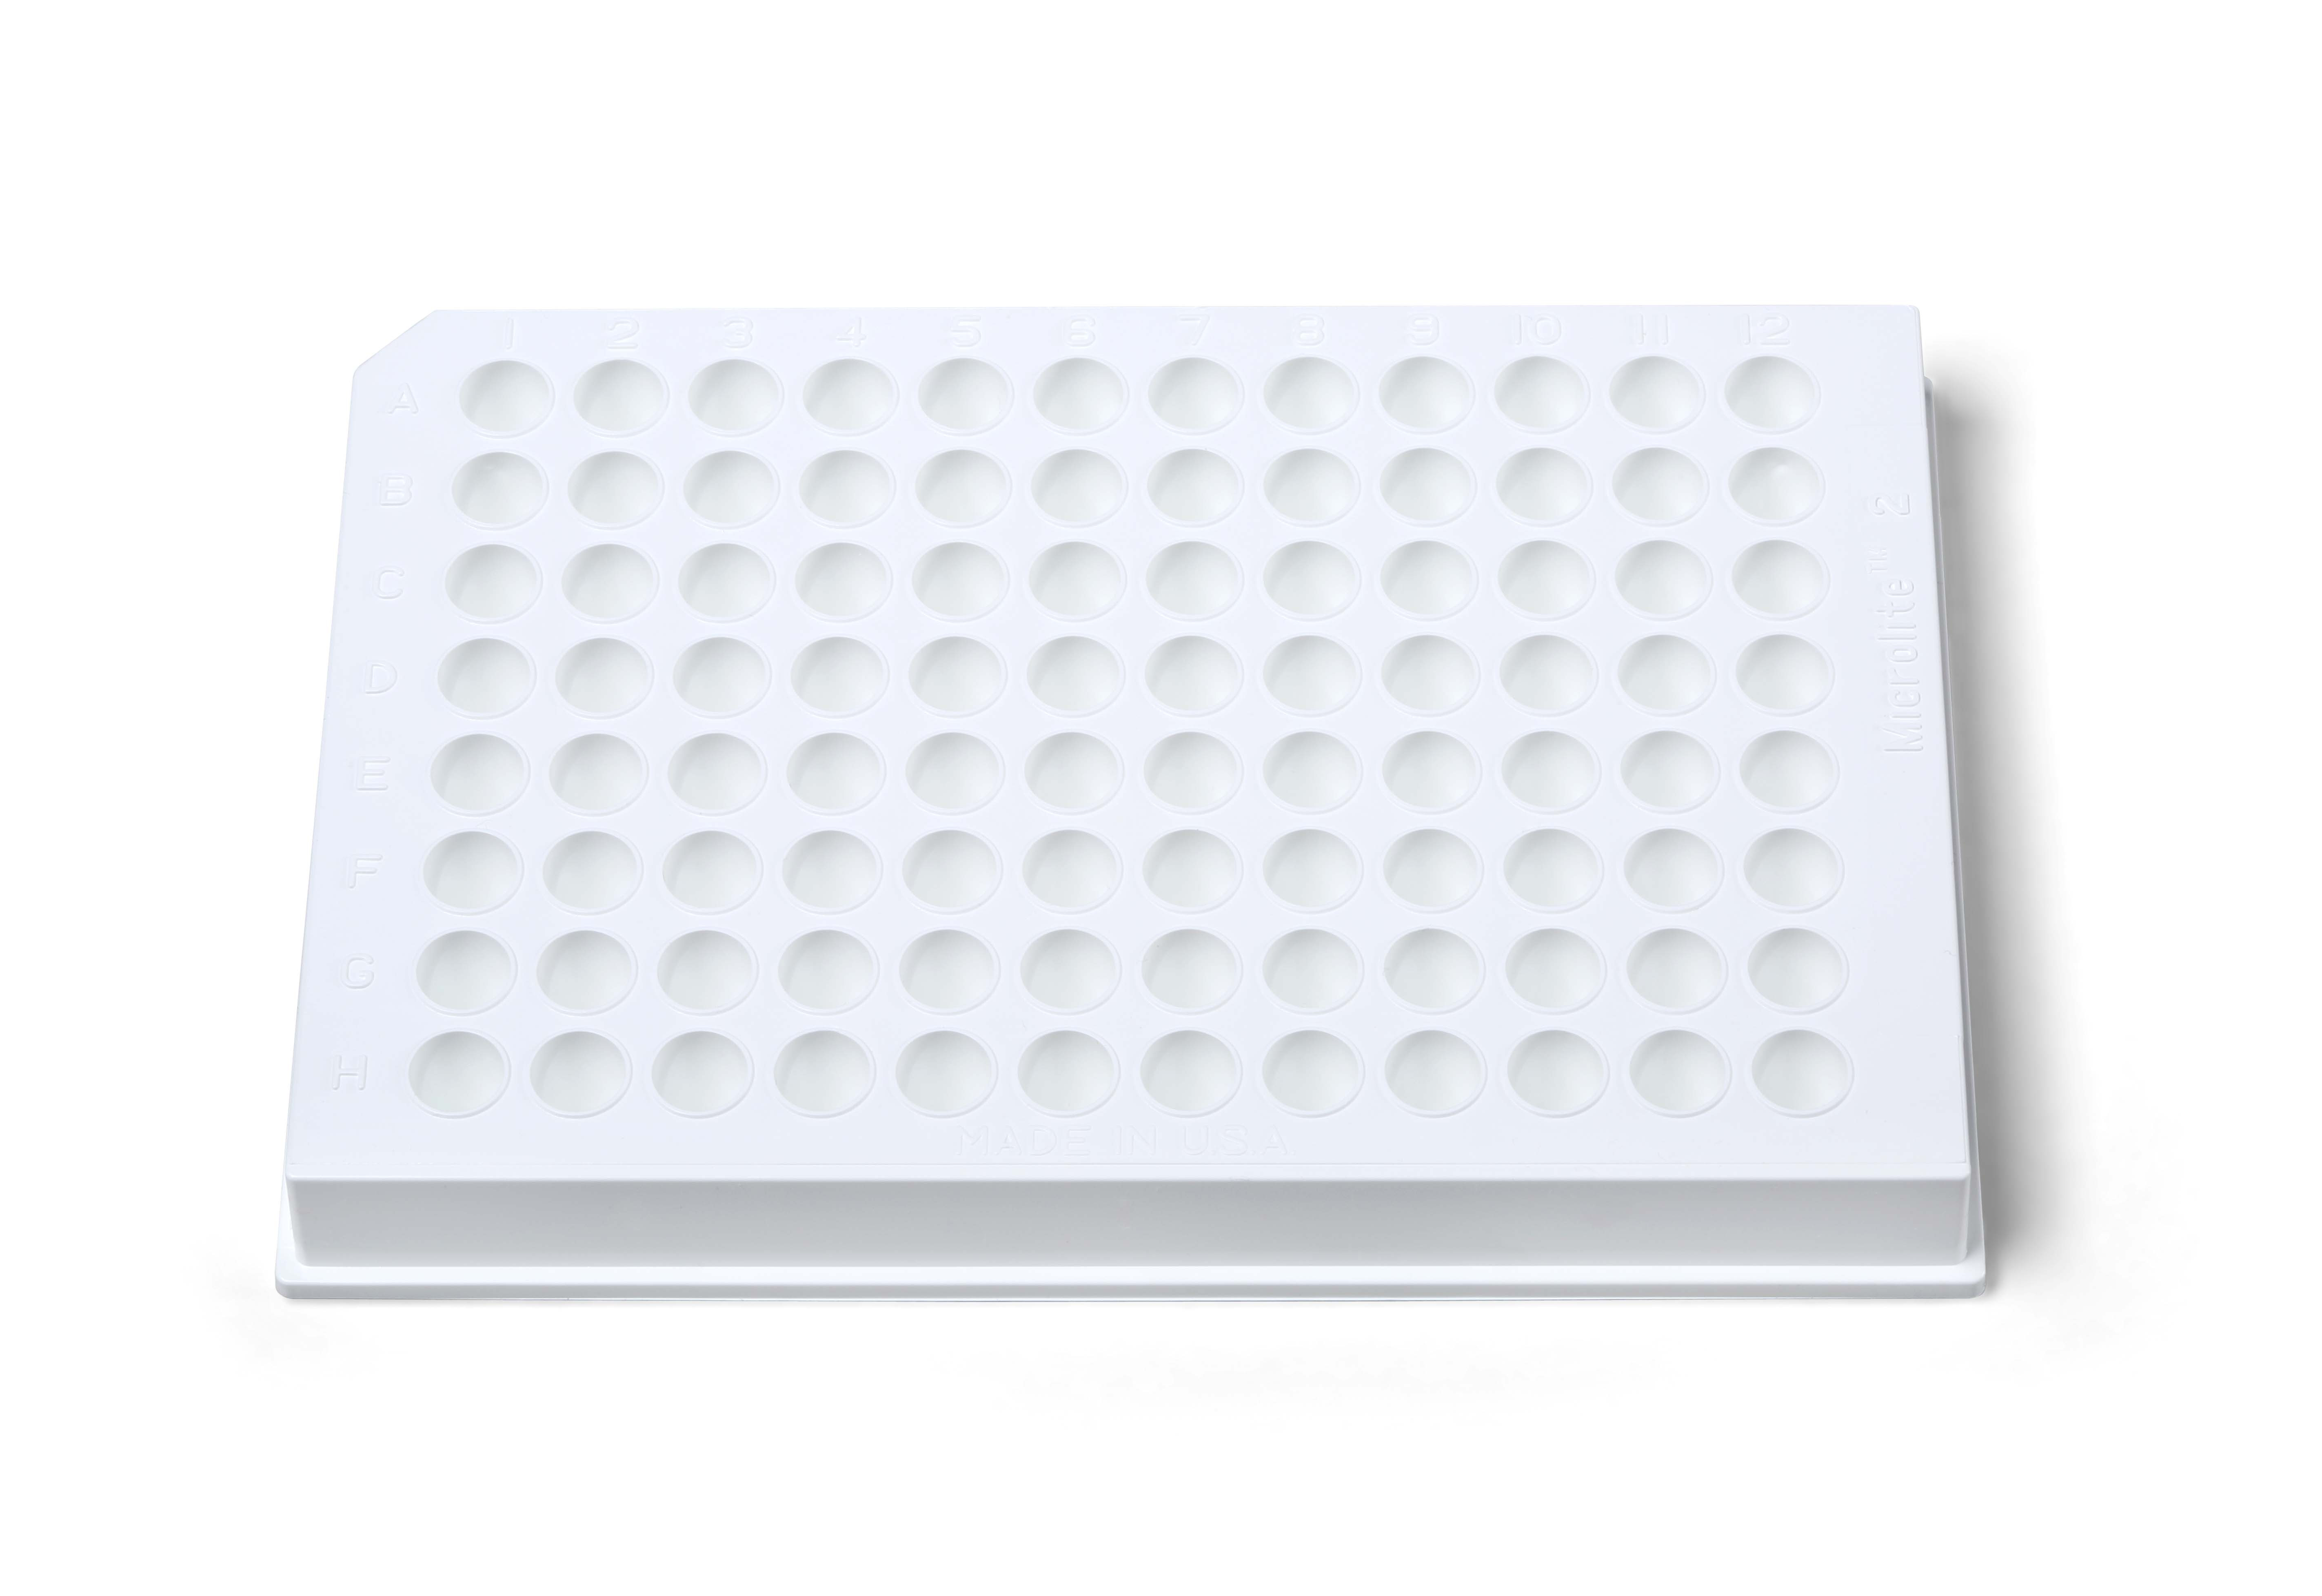 Microbial Luminescence System Microwell Plate